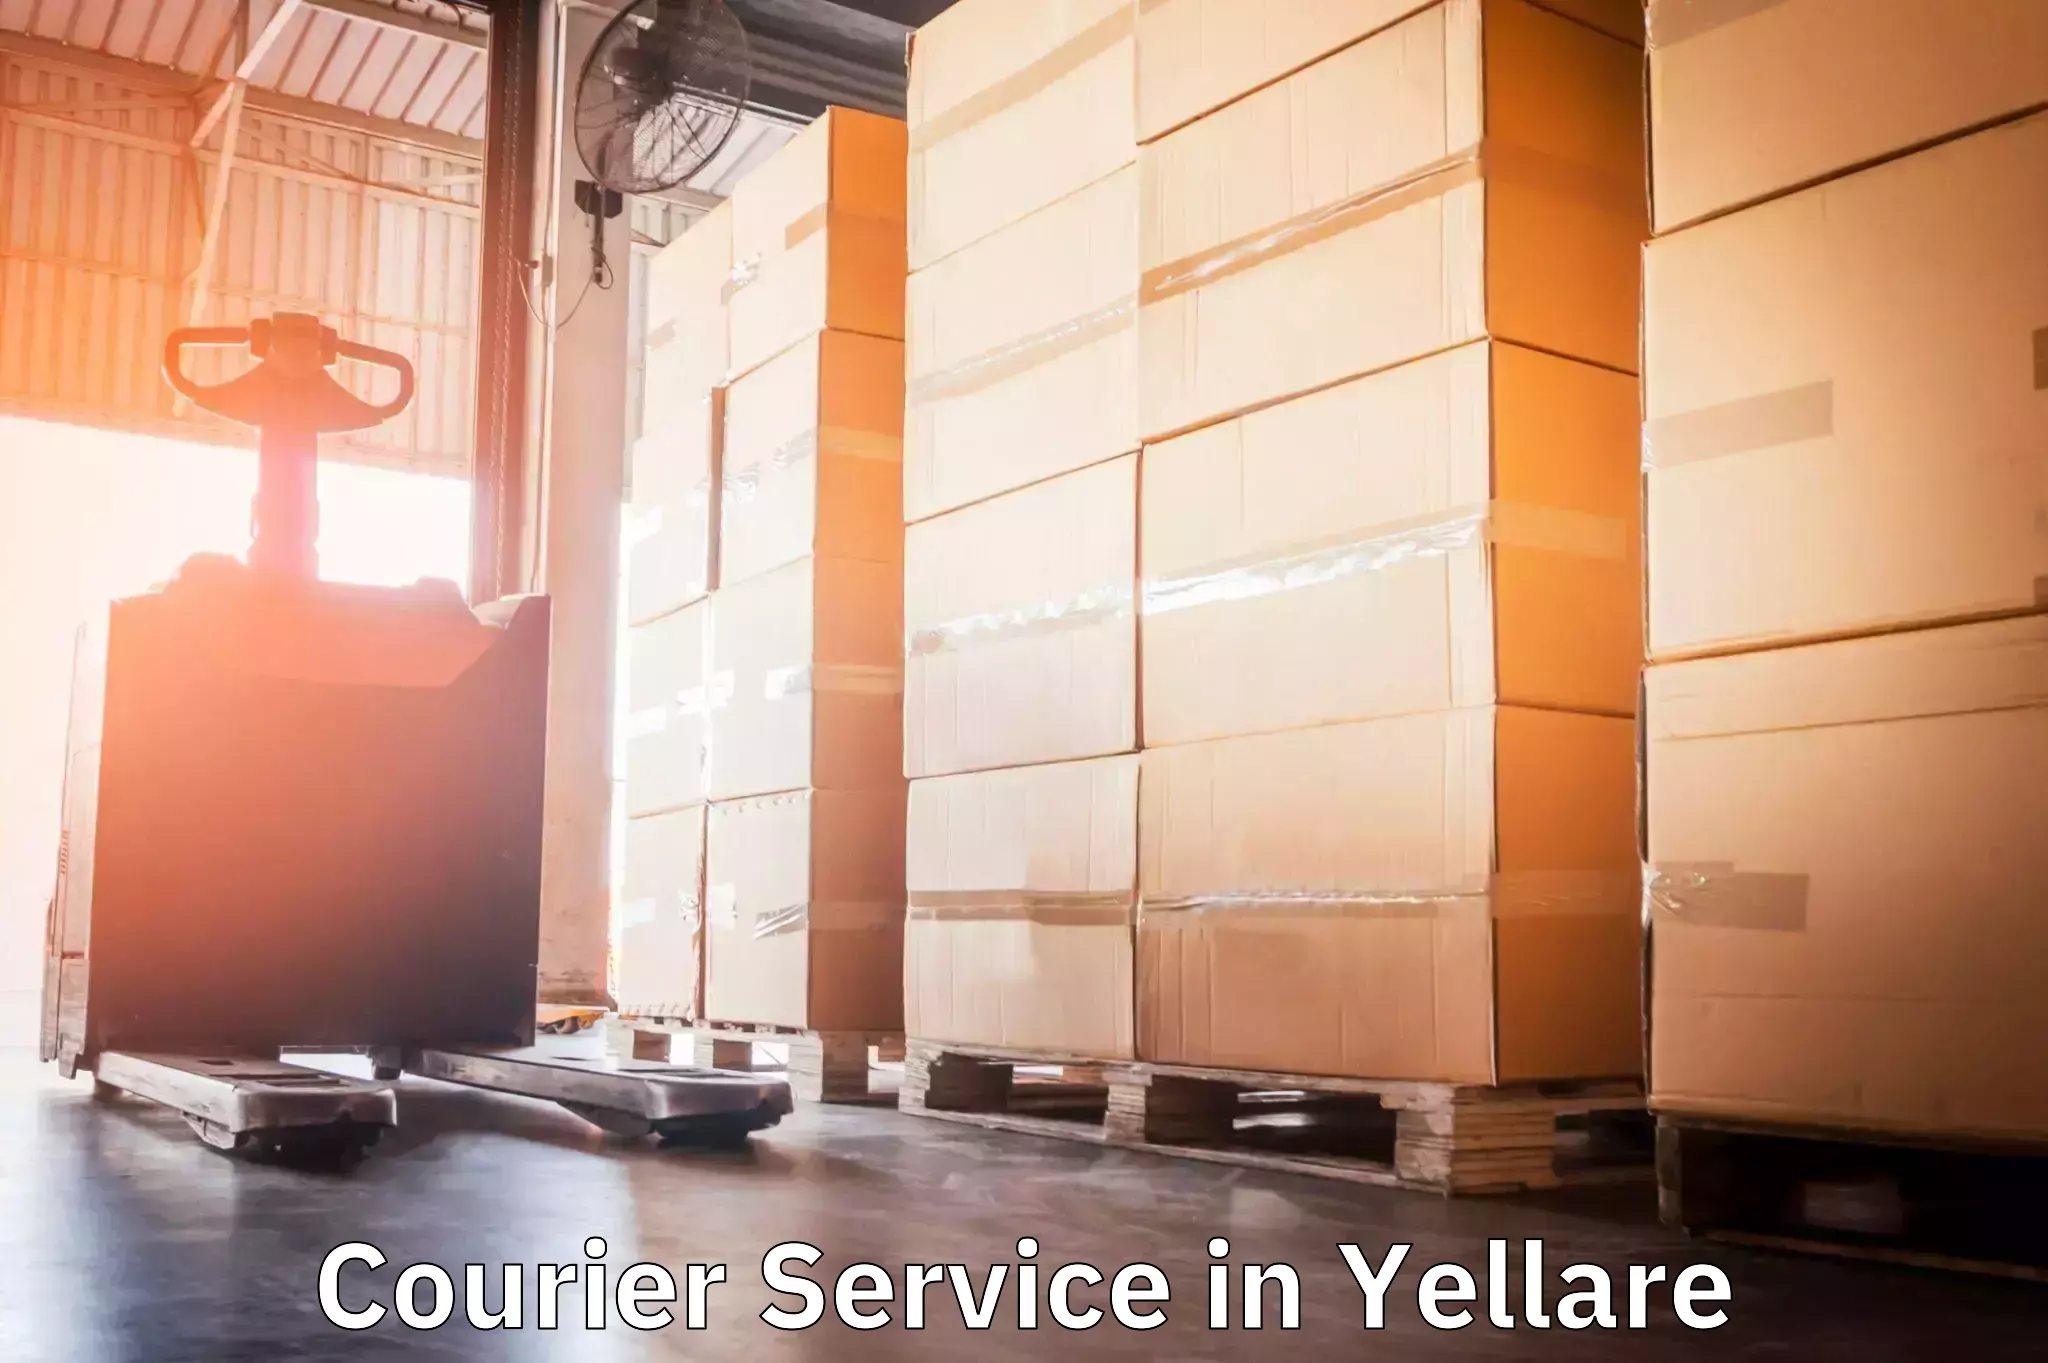 Next-day freight services in Yellare